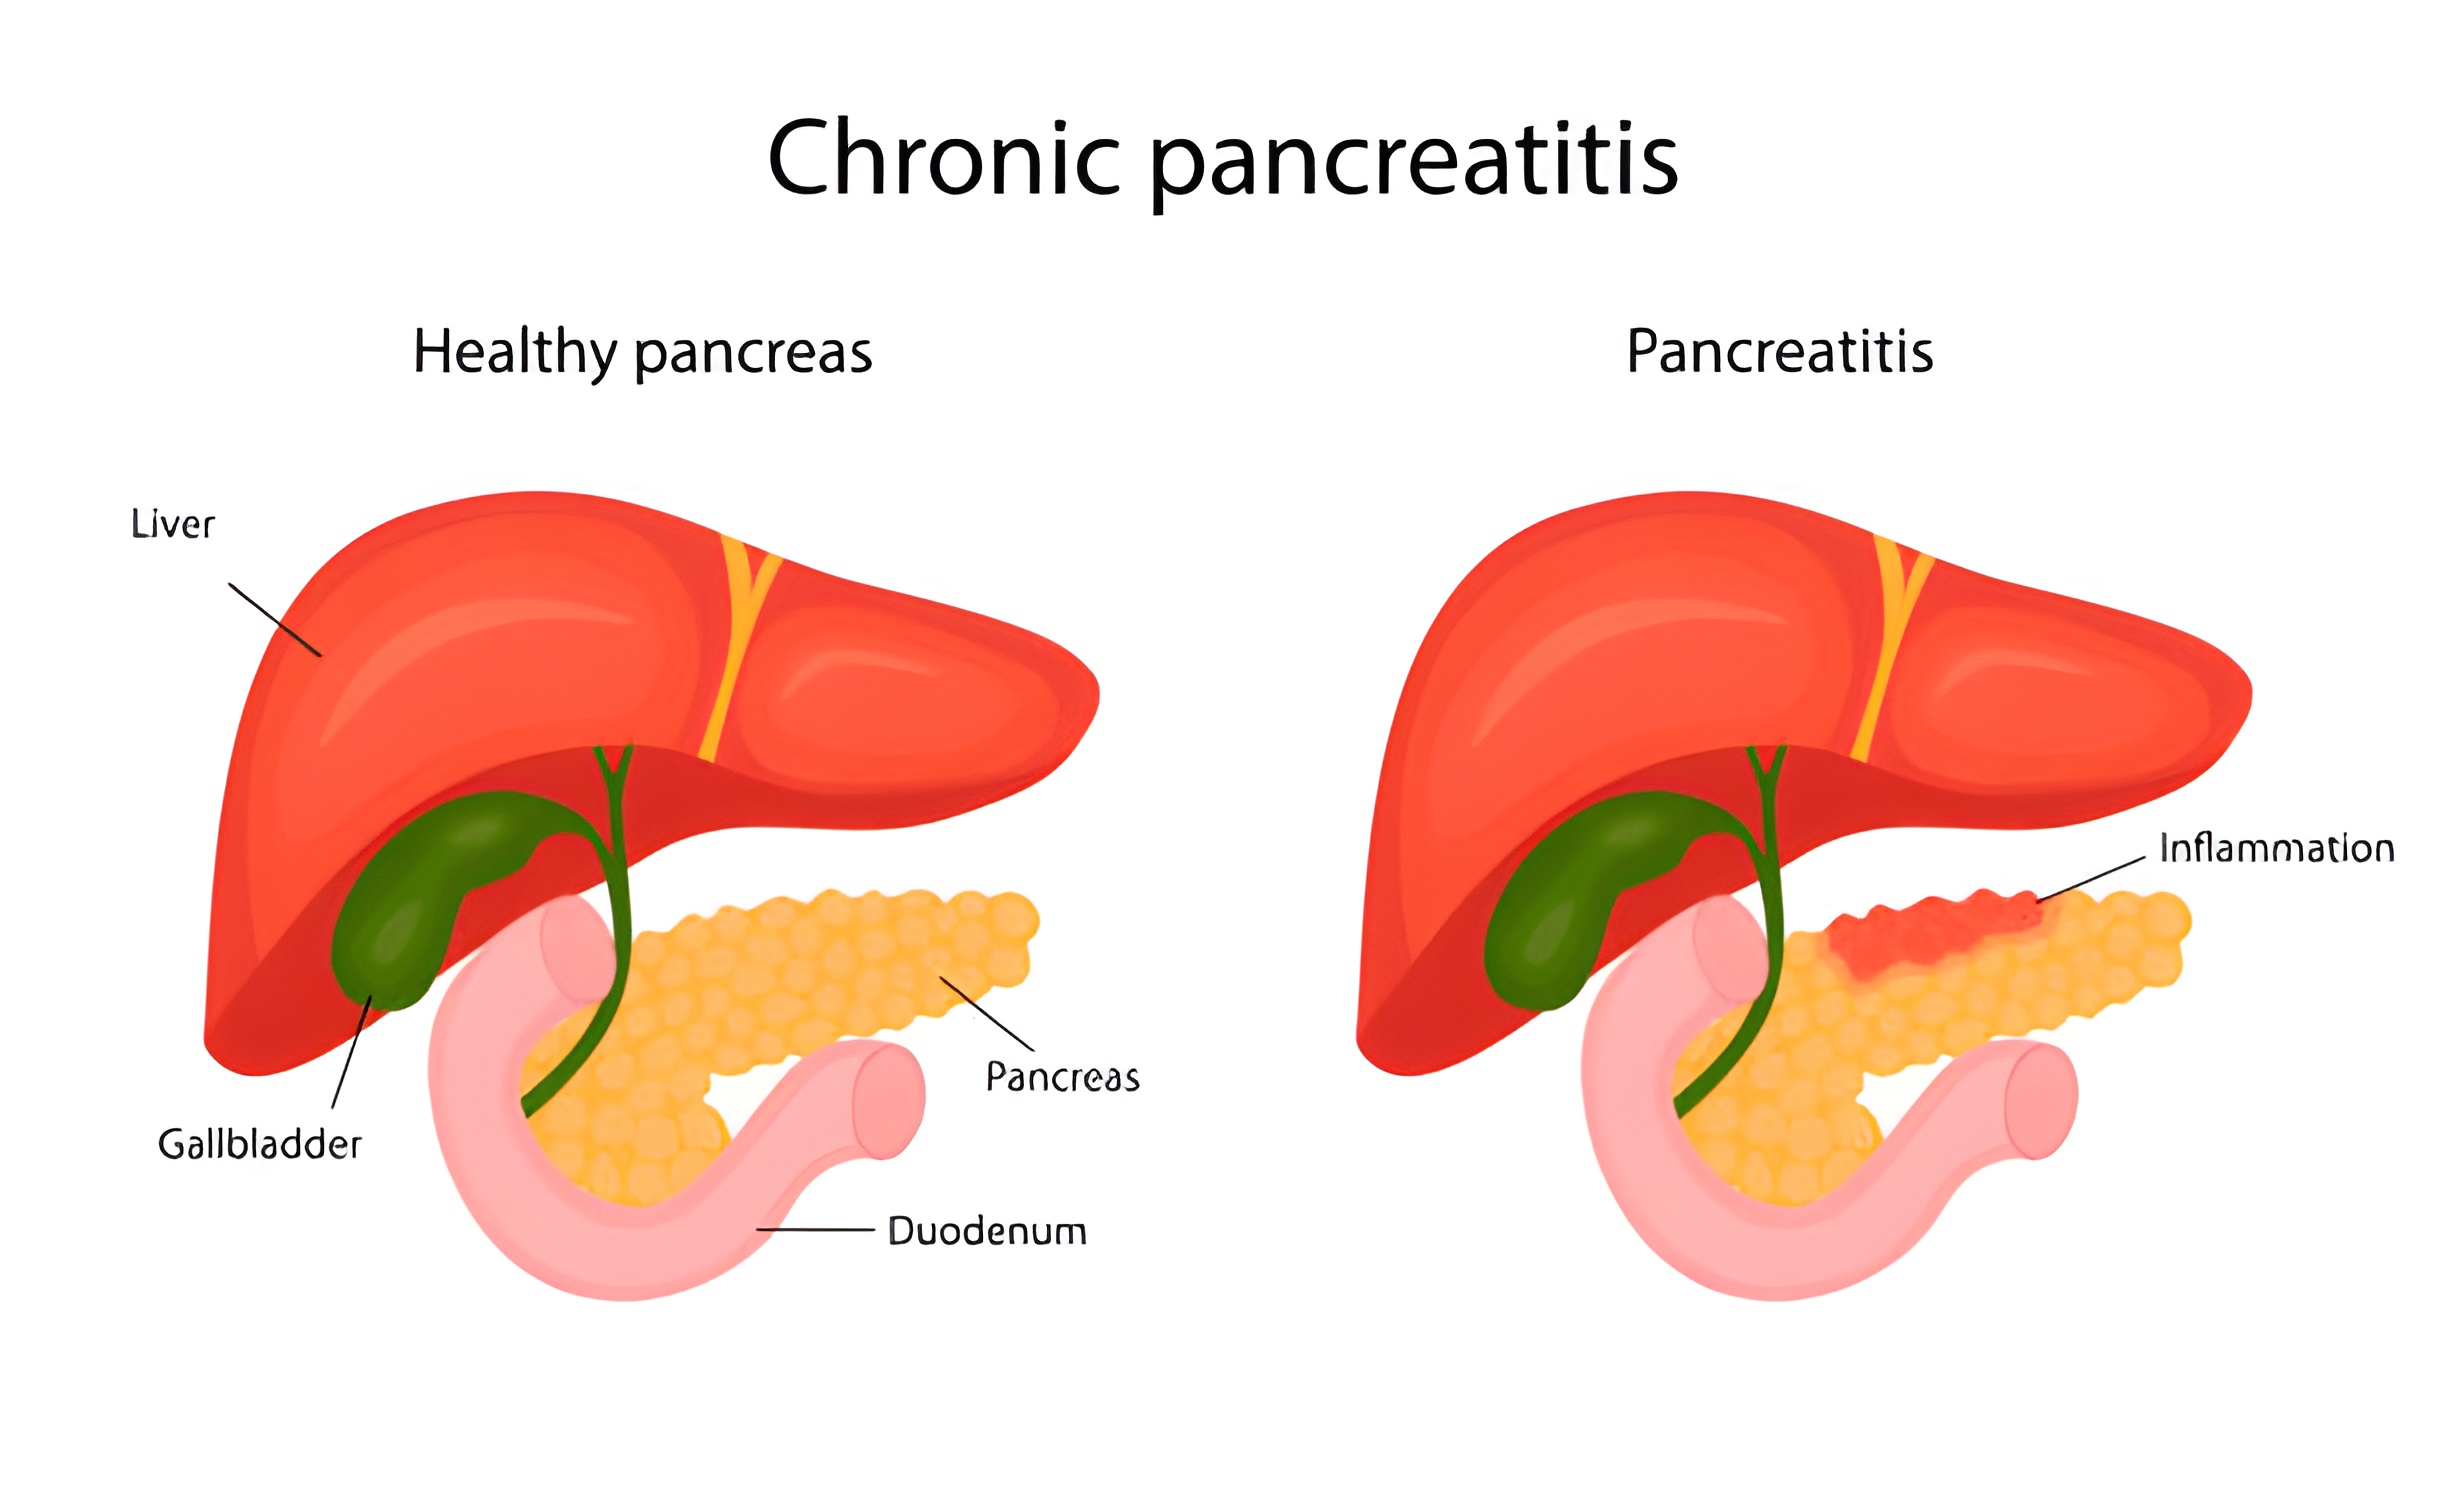  What are the symptoms of chronic pancreatitis?